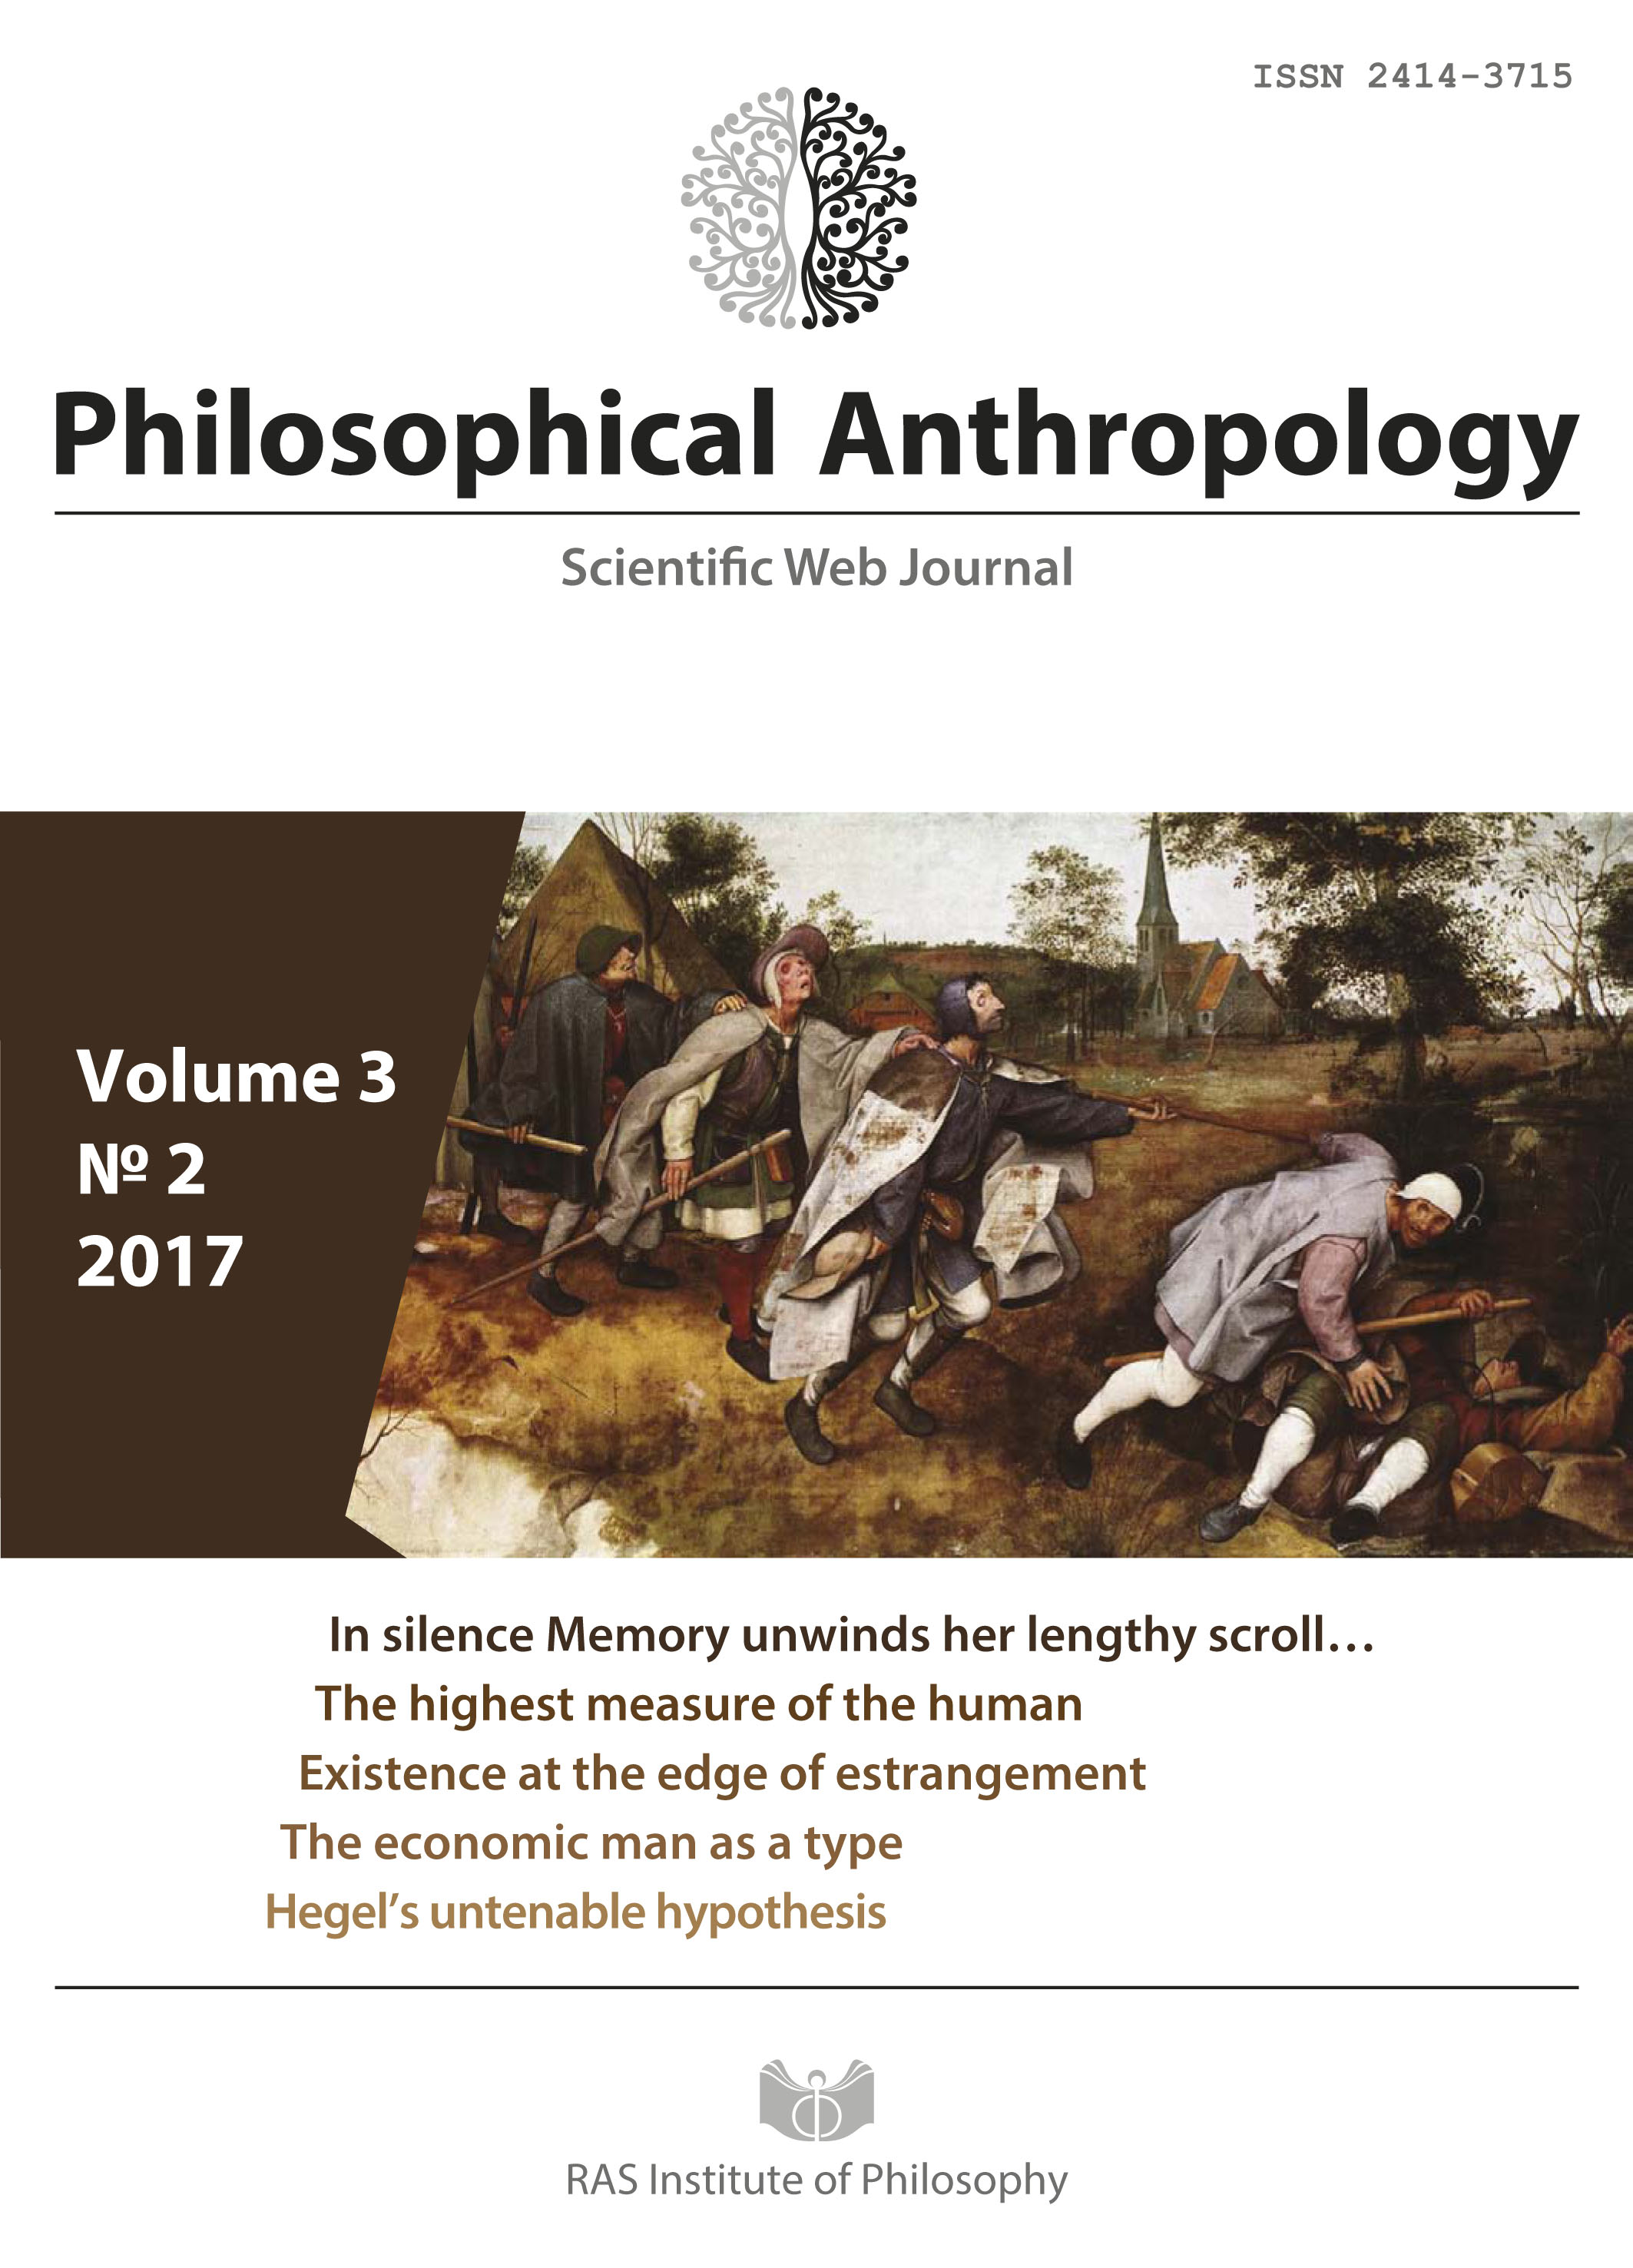 Philosophical anthropology 2017, Vol. 3, No. 2.